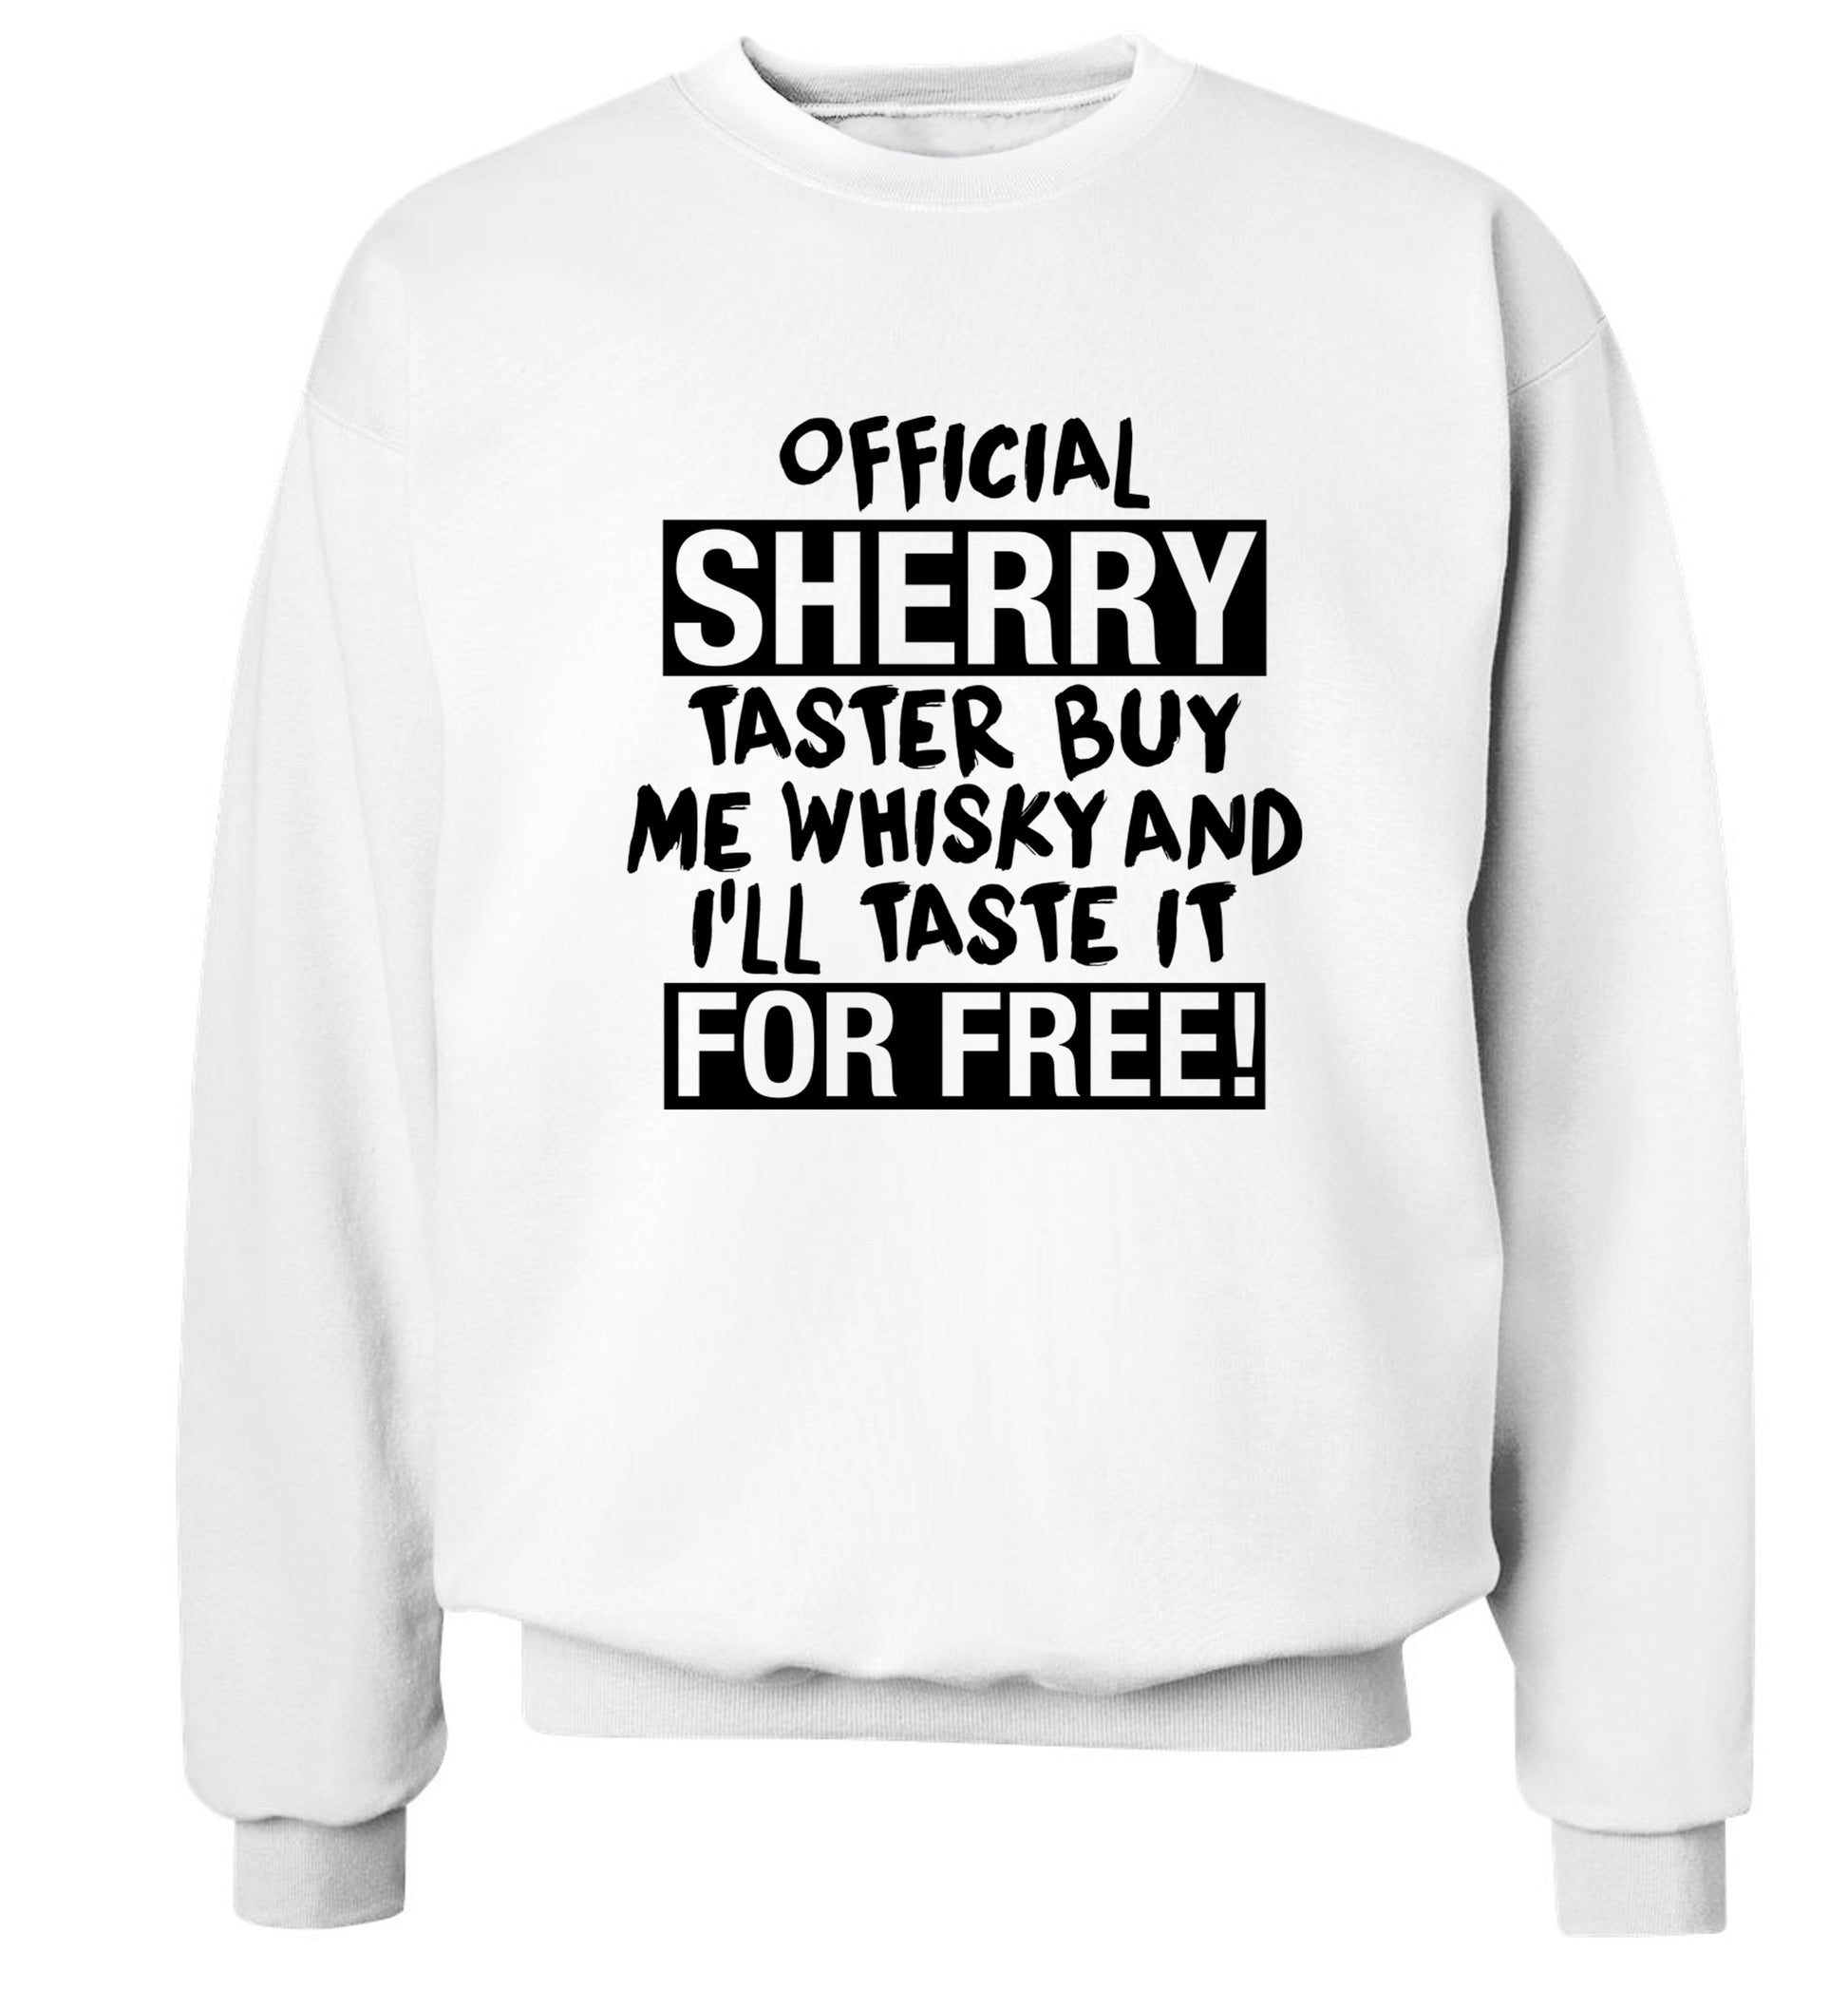 Official sherry taster buy me sherry and I'll taste it for free Adult's unisex white Sweater 2XL